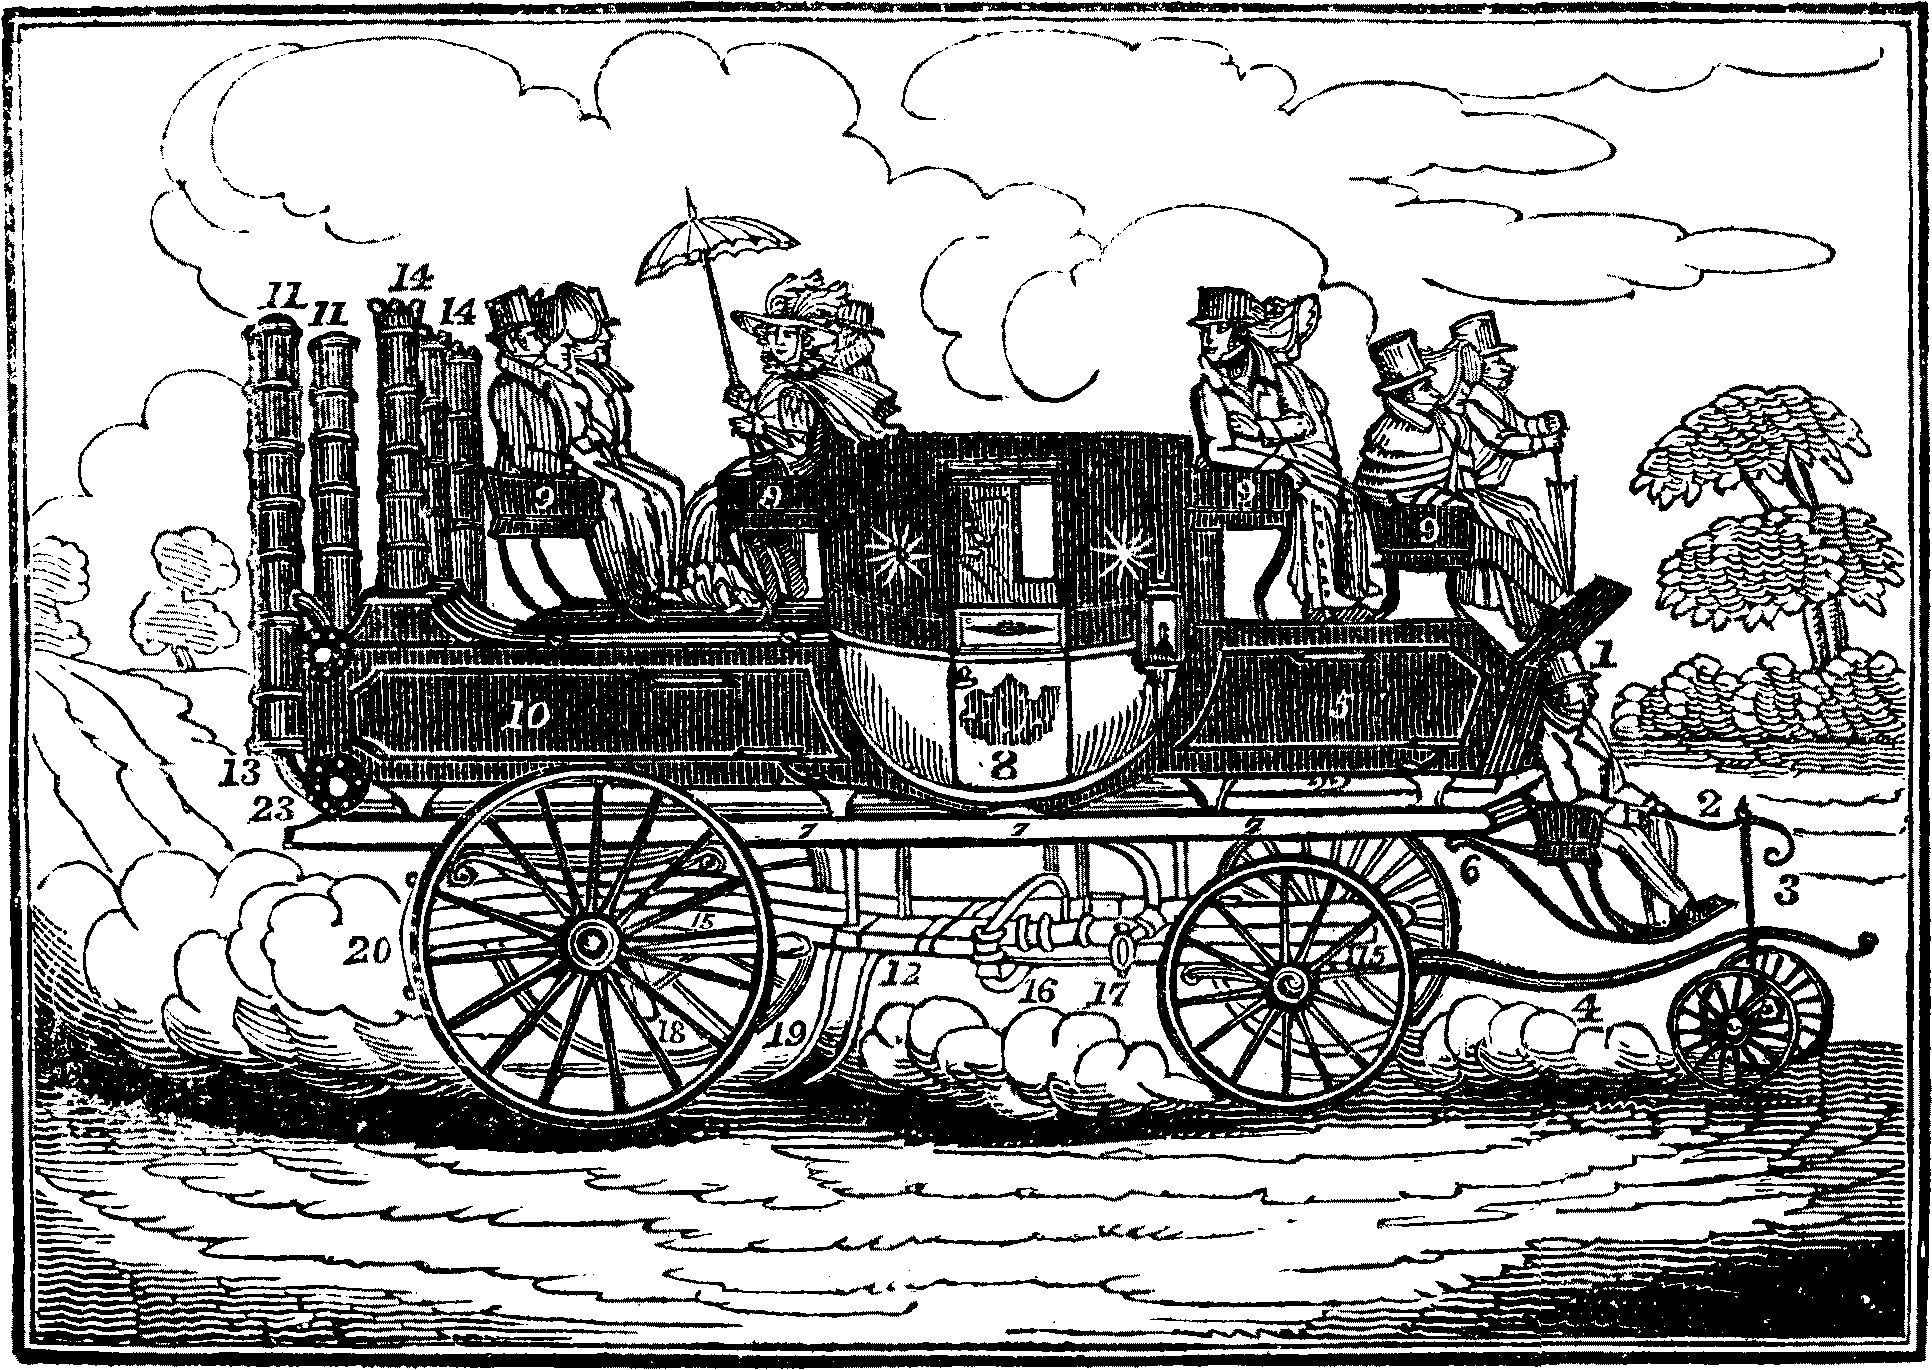 New Steam Carriage.